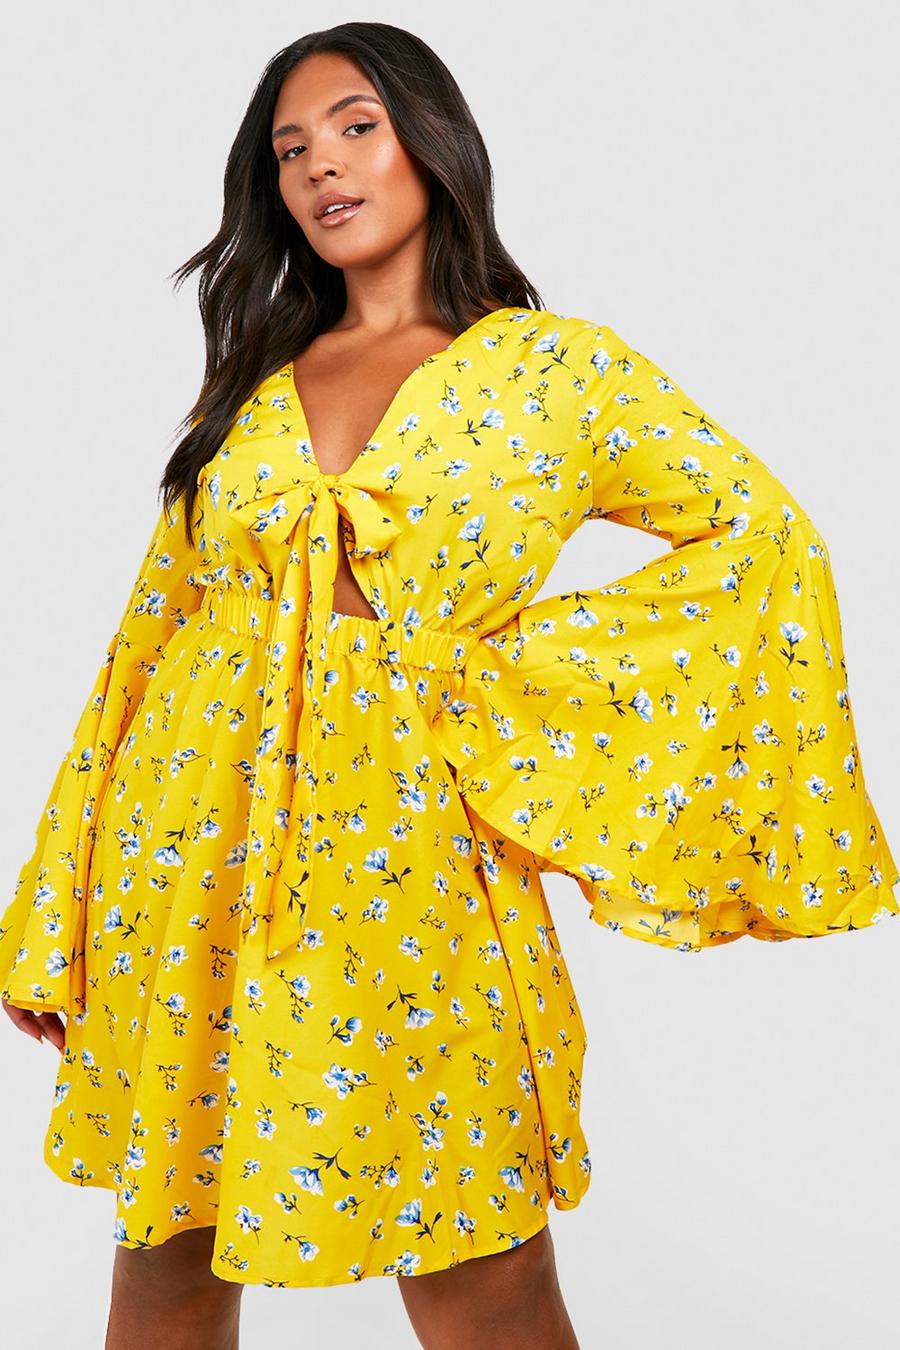 Grande taille - Robe patineuse fleurie à nœud, Yellow